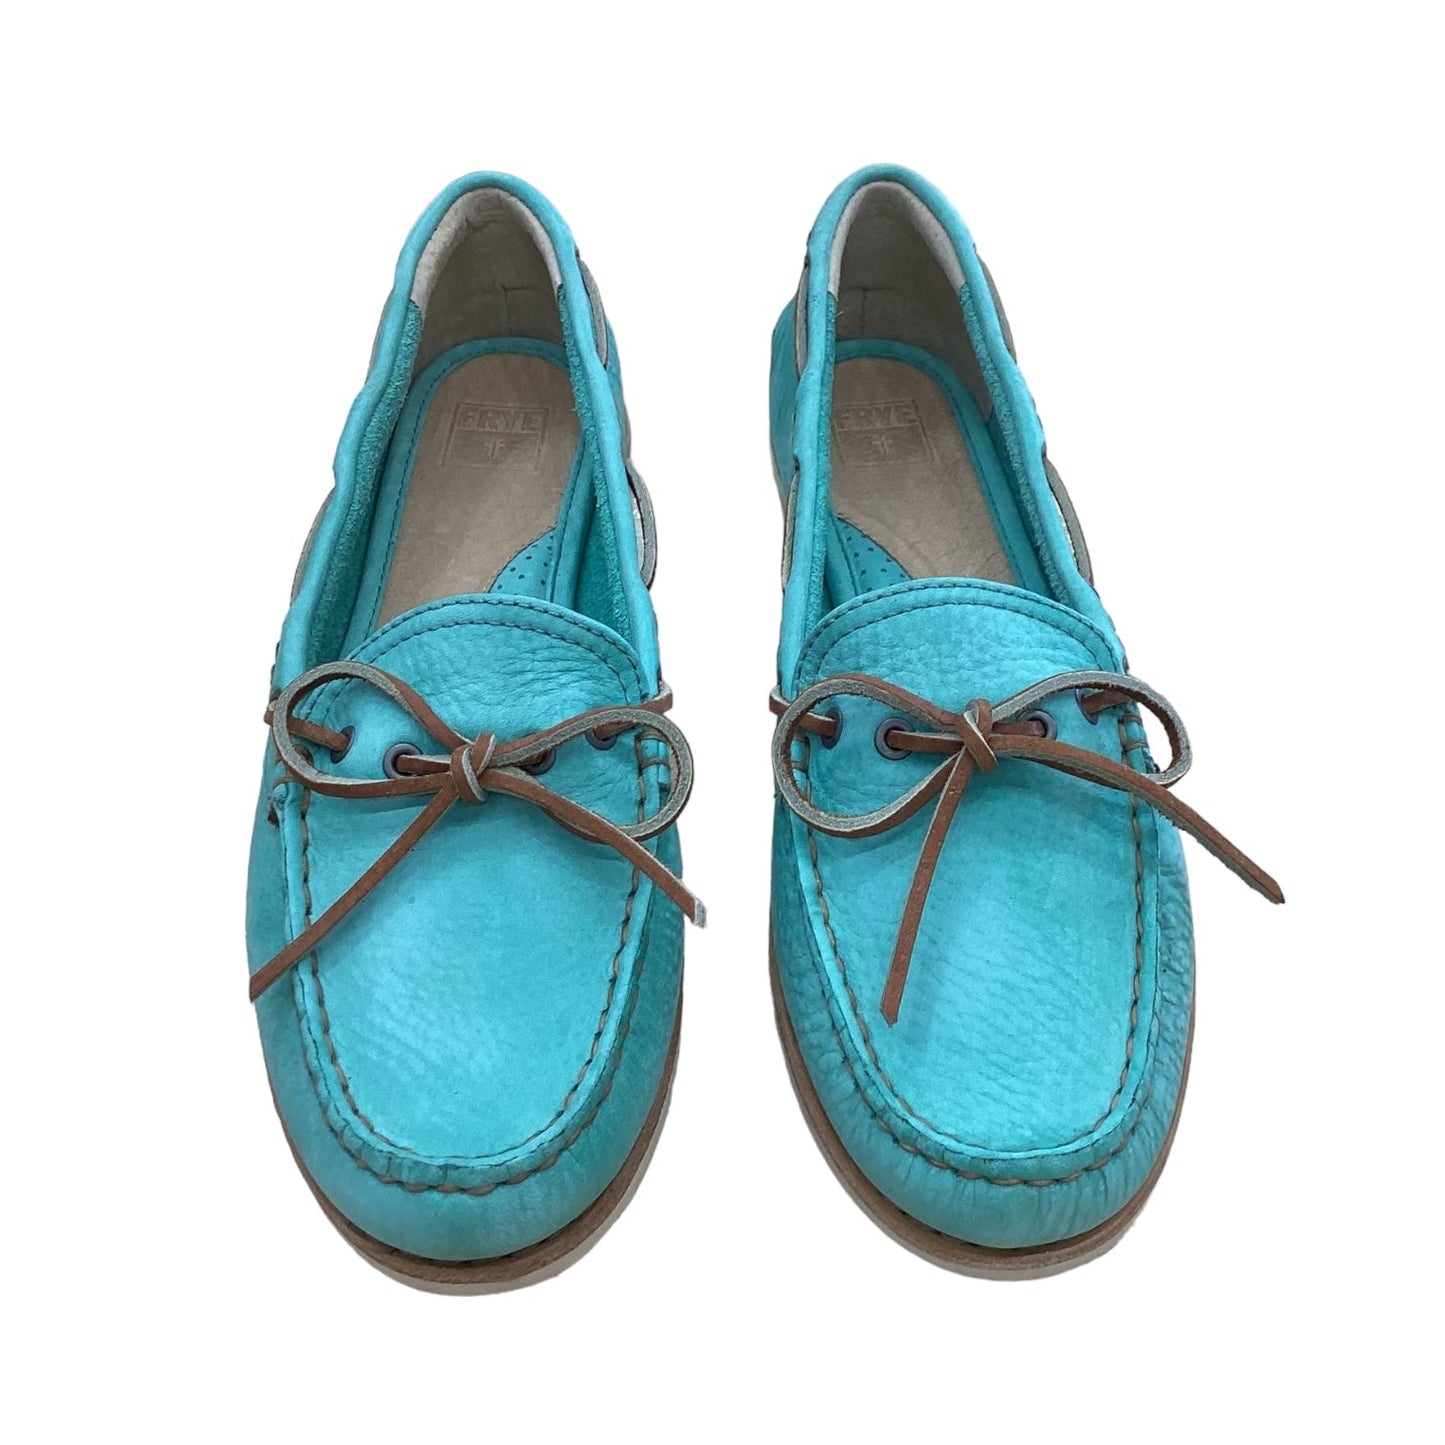 Teal Shoes Flats Frye, Size 8